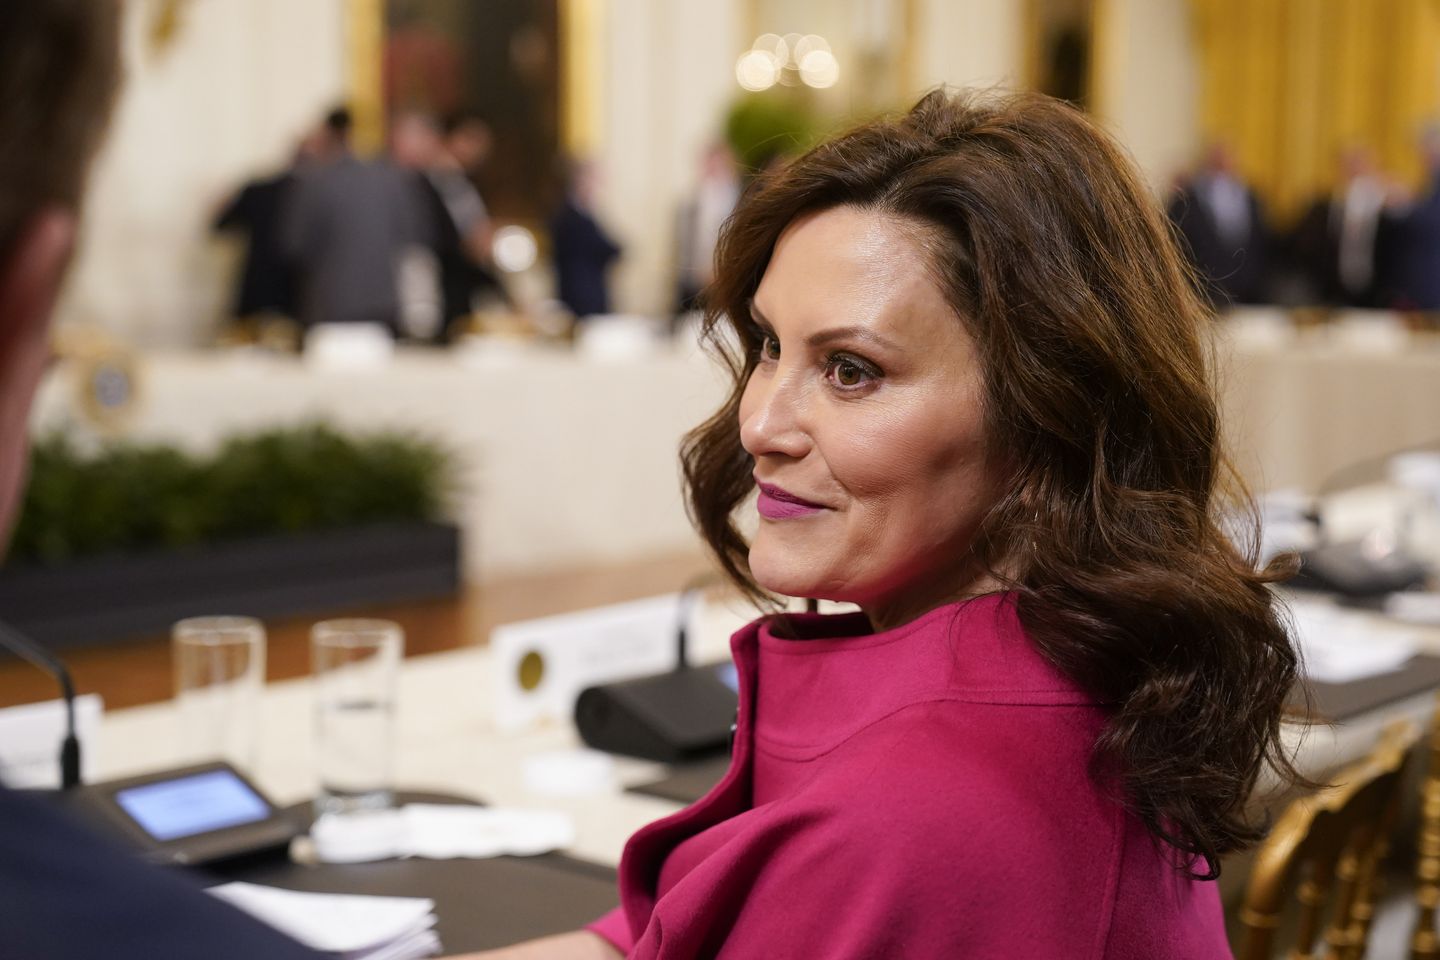 Michigan Gov. Gretchen Whitmer says she uses Chinese-owned TikTok but securely